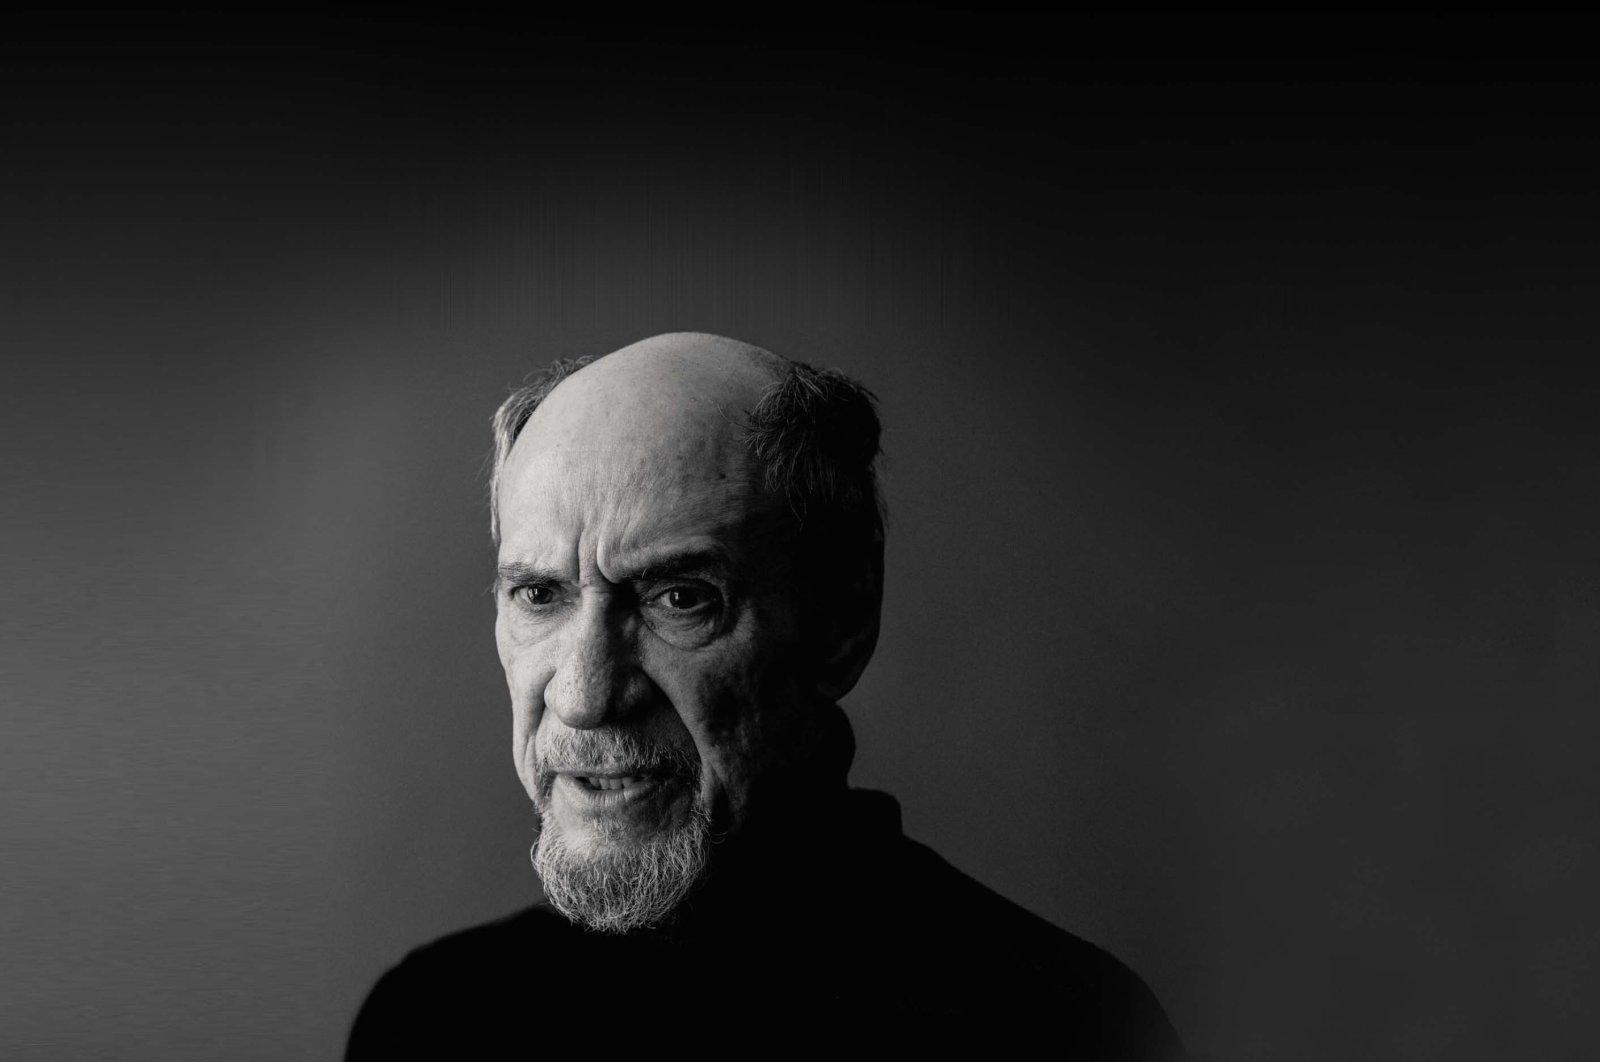 F. Murray Abraham won Oscar for best actor with his role as Antonio Salieri in "Amadeus."